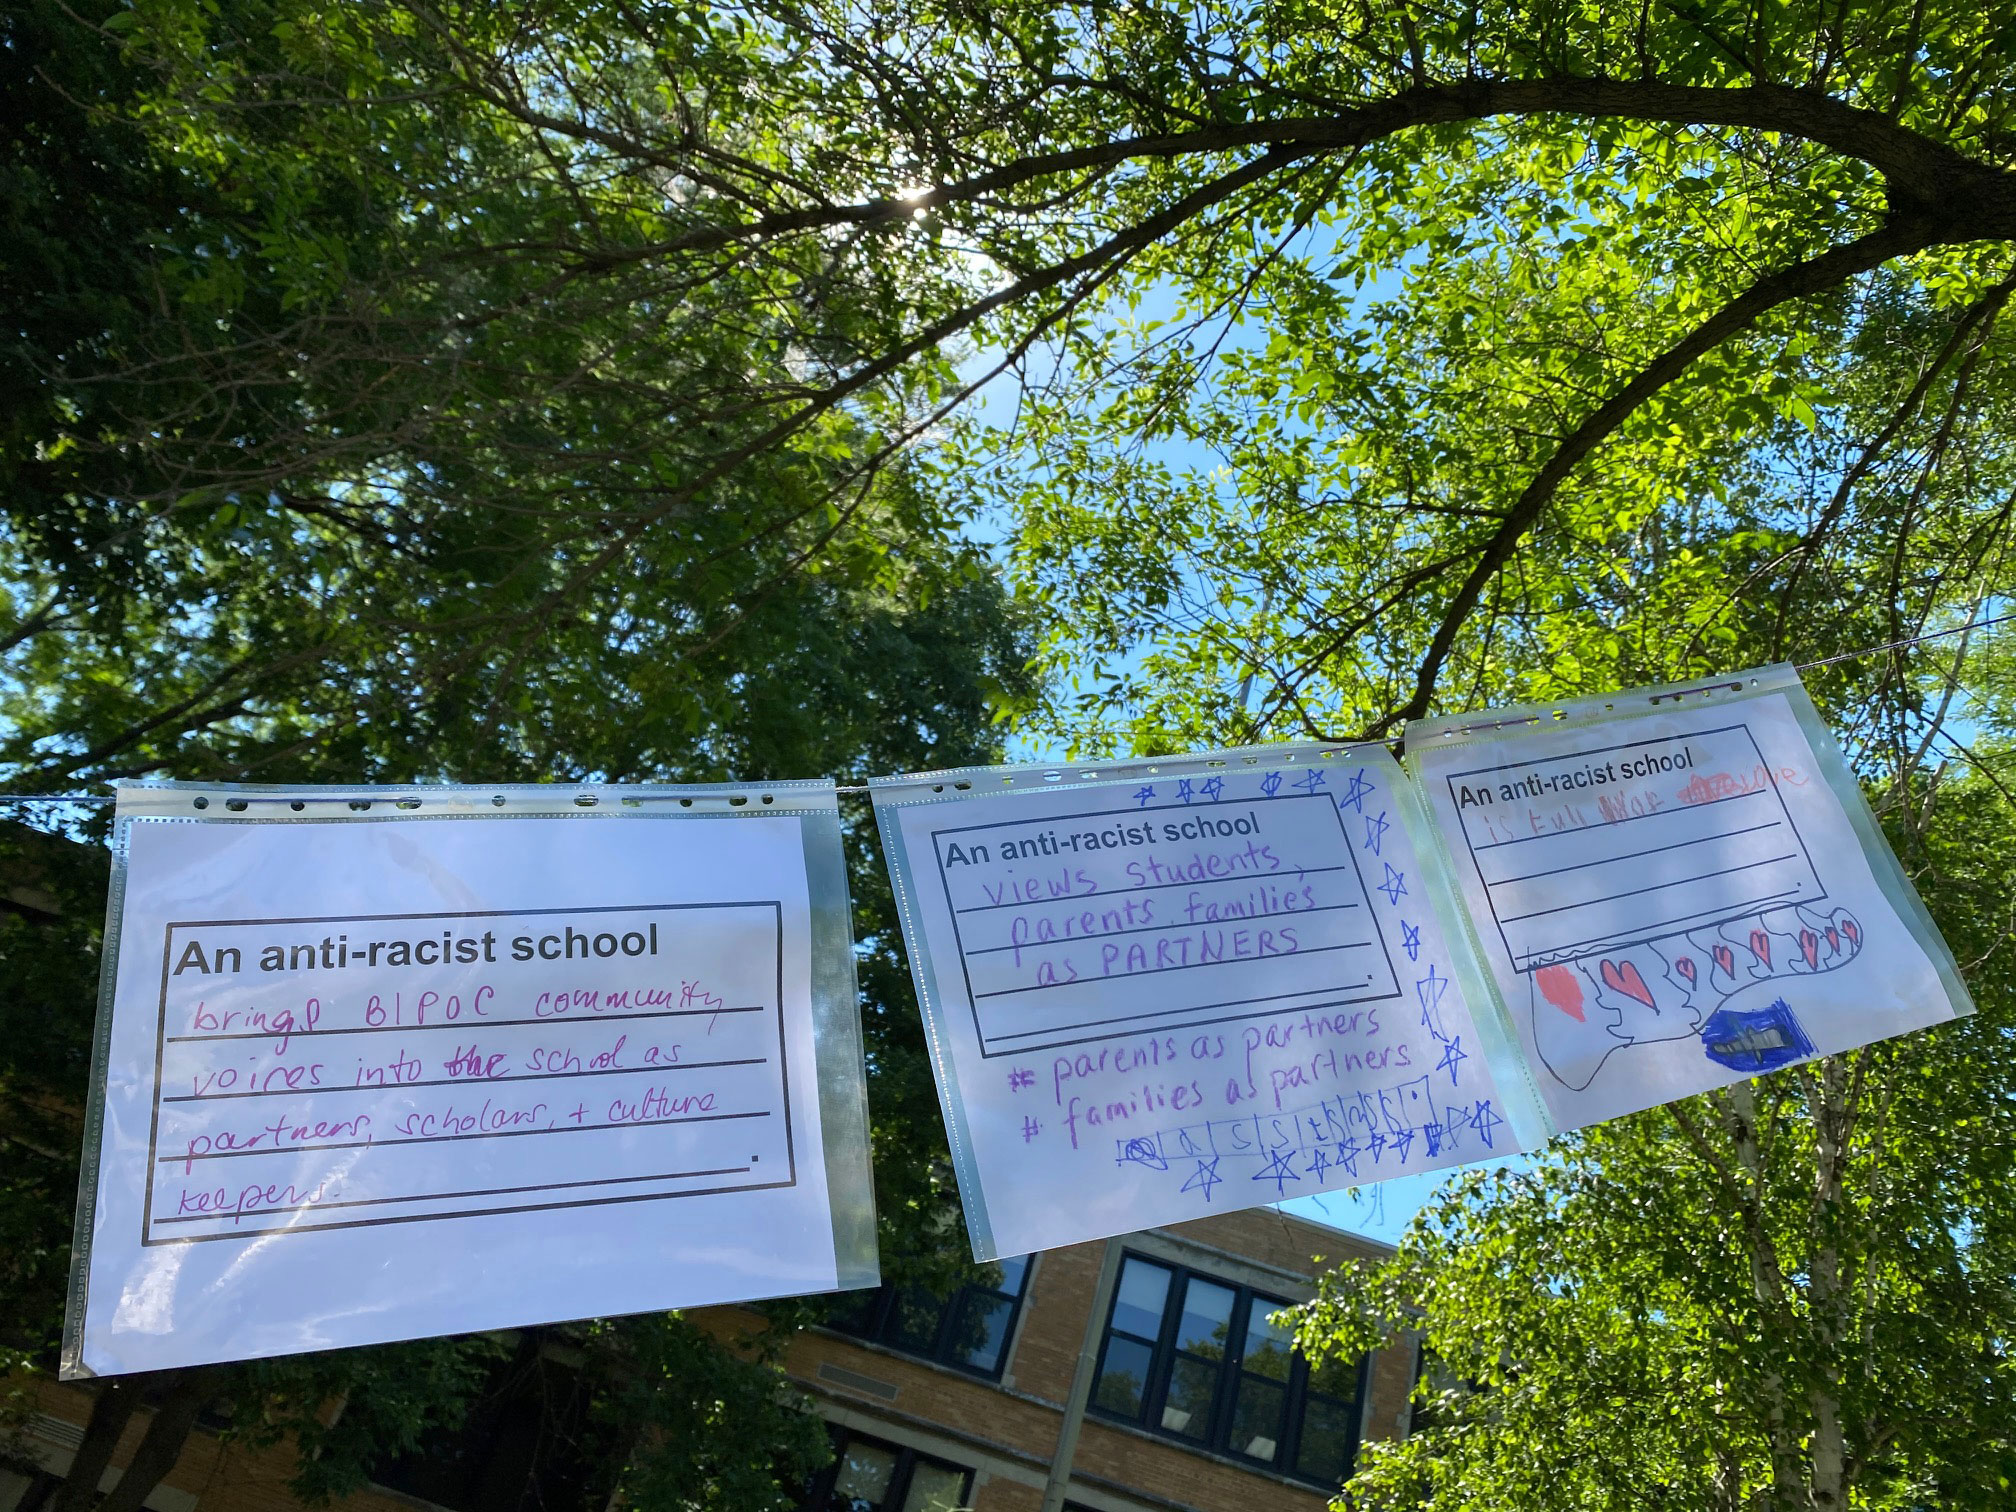 Youth and families’ visions for an antiracist school hang in front of an elementary school during a Day of Solidarity action in Madison, Wisconsin.